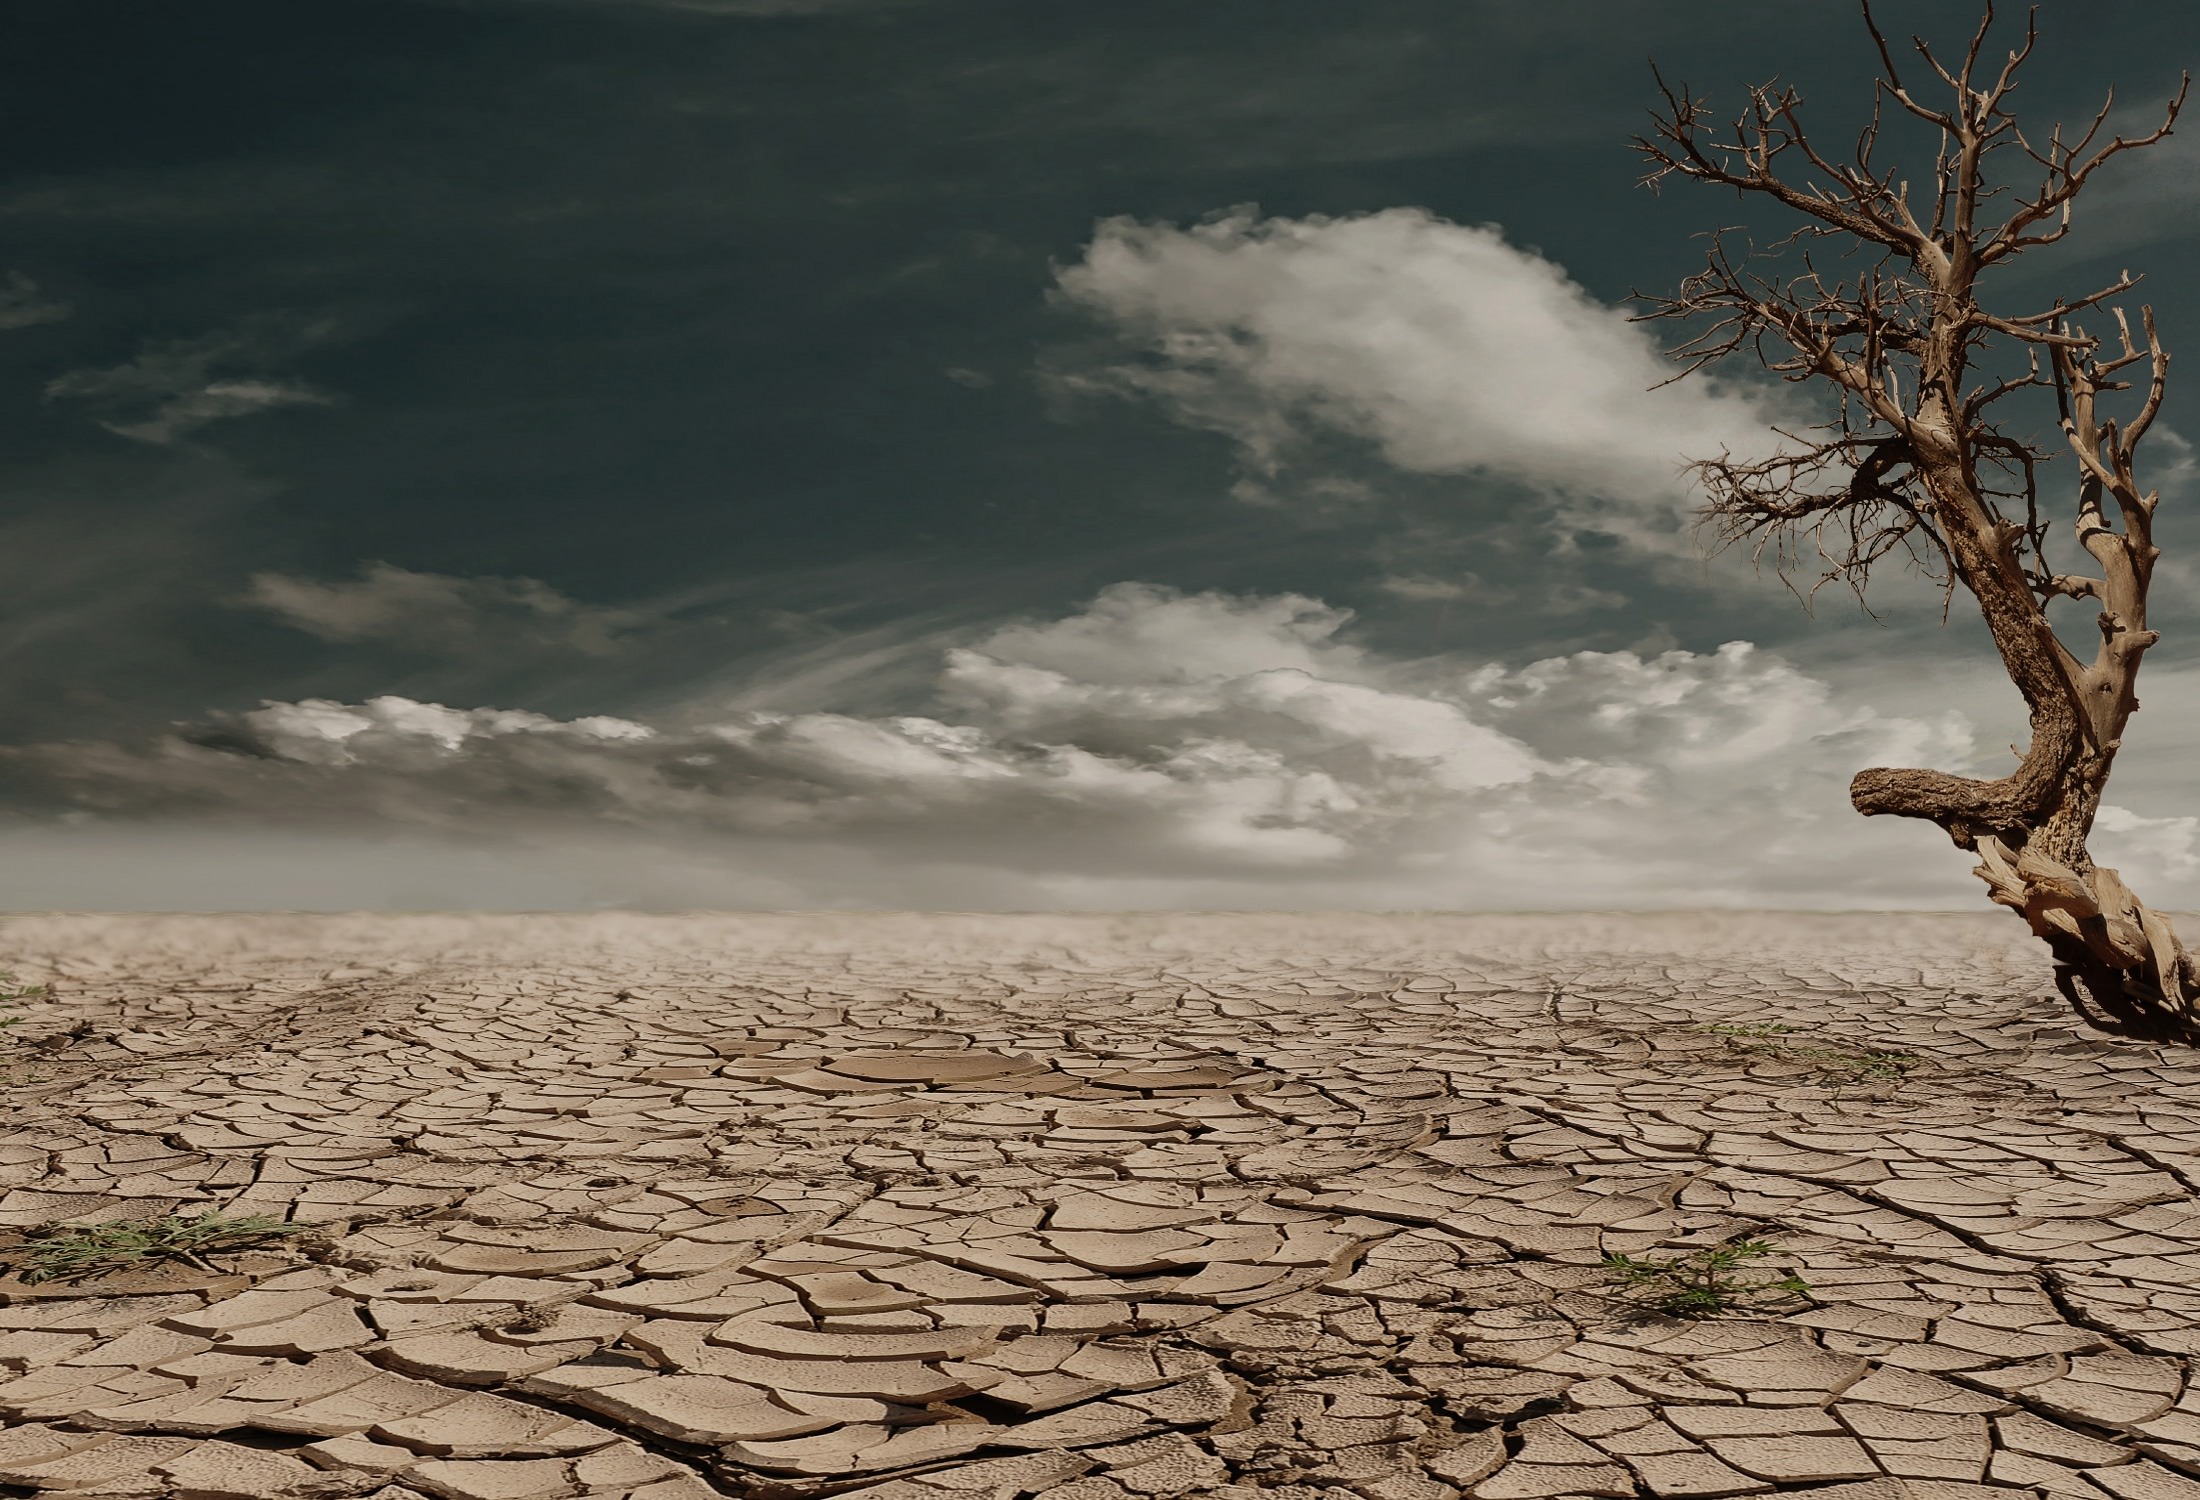 Climate Scientists Study the Odds of a Megadrought